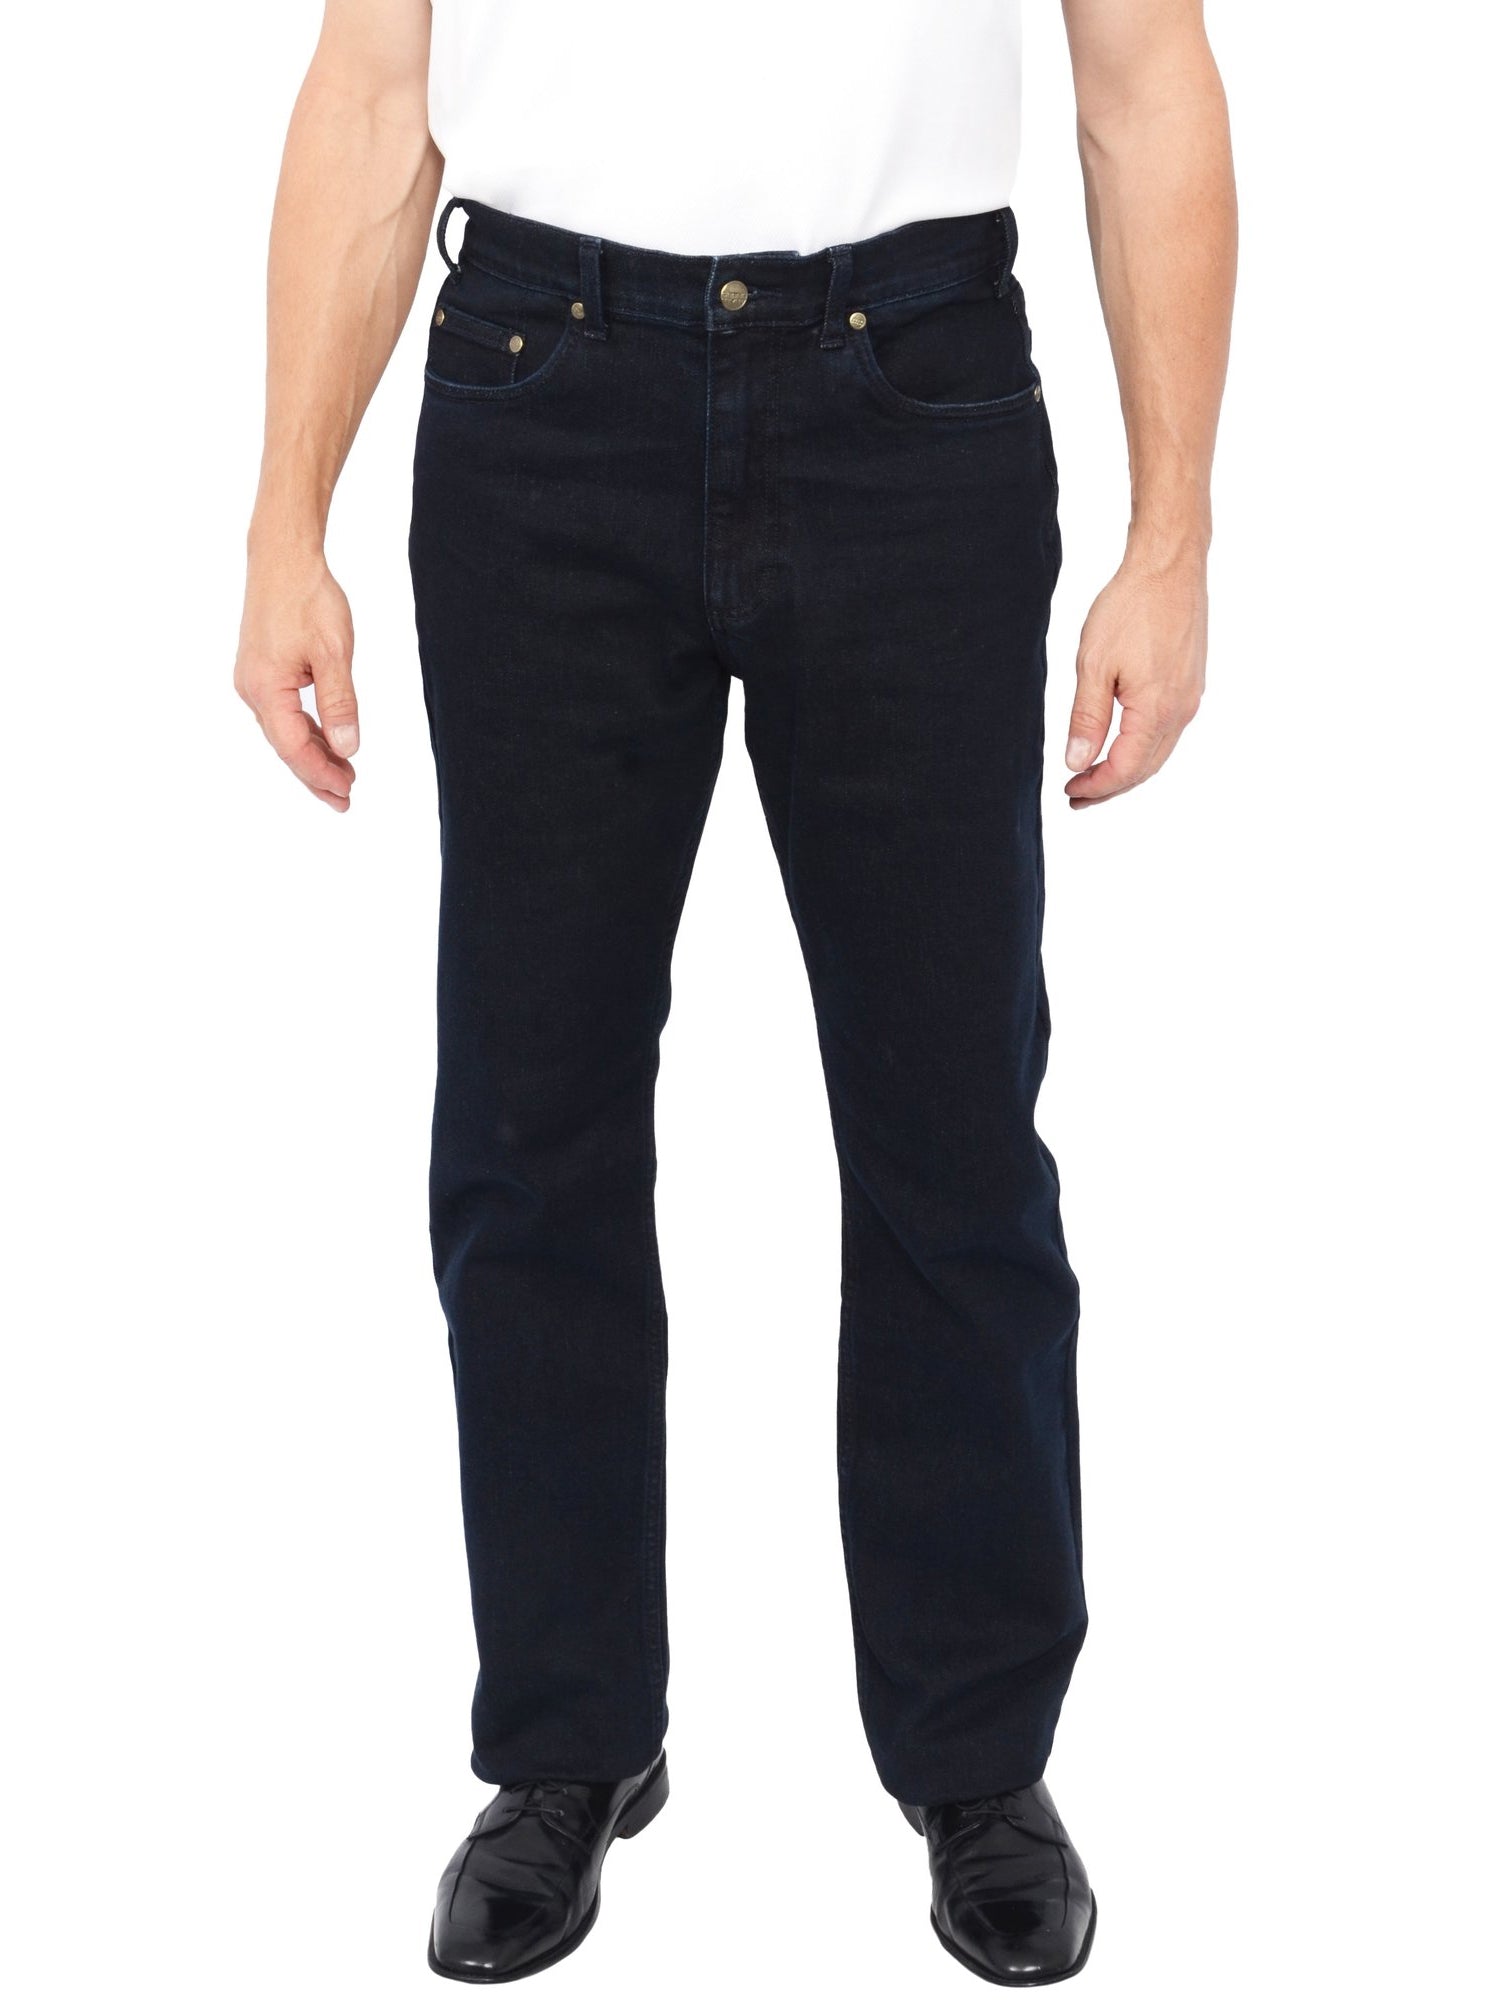 Grand River Stretch Traditional Fit Men's Jeans in Midnight - Regular Sizes